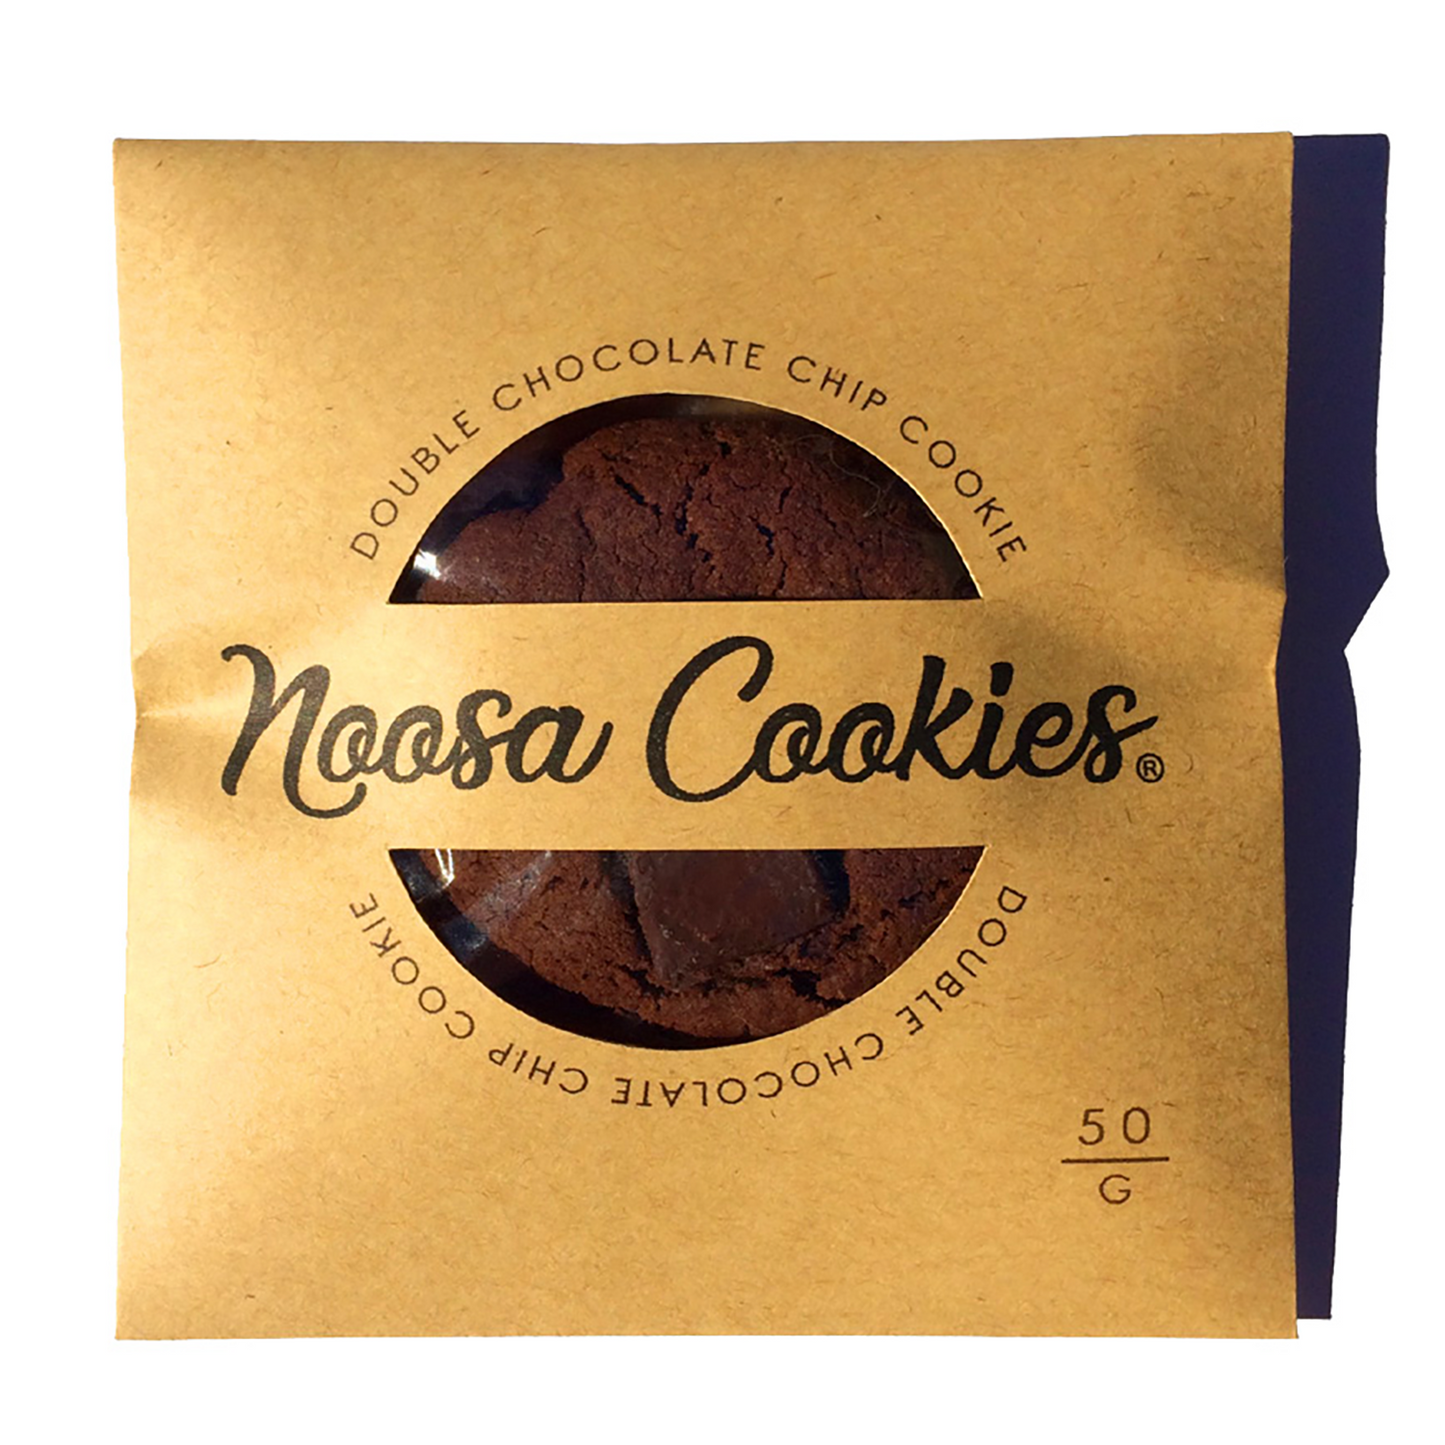 NOOSA COOKIES ® - DOUBLE CHOC CHIP / 50g